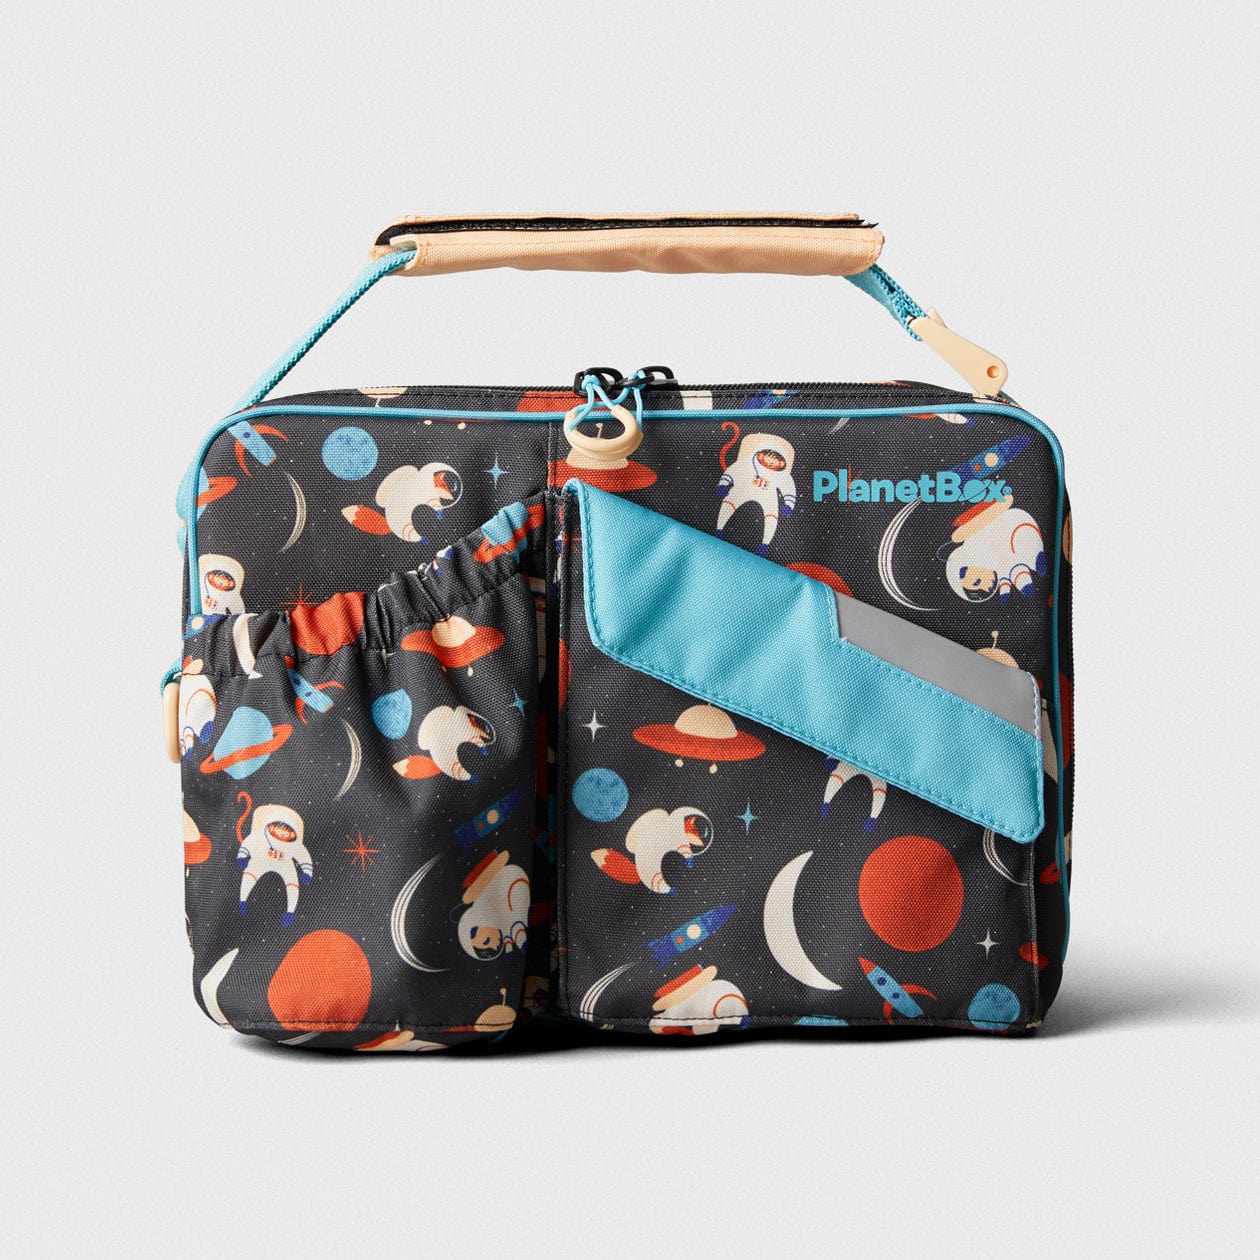 Rover/ Launch Carry Bag in Unicorn Magic by PlanetBox